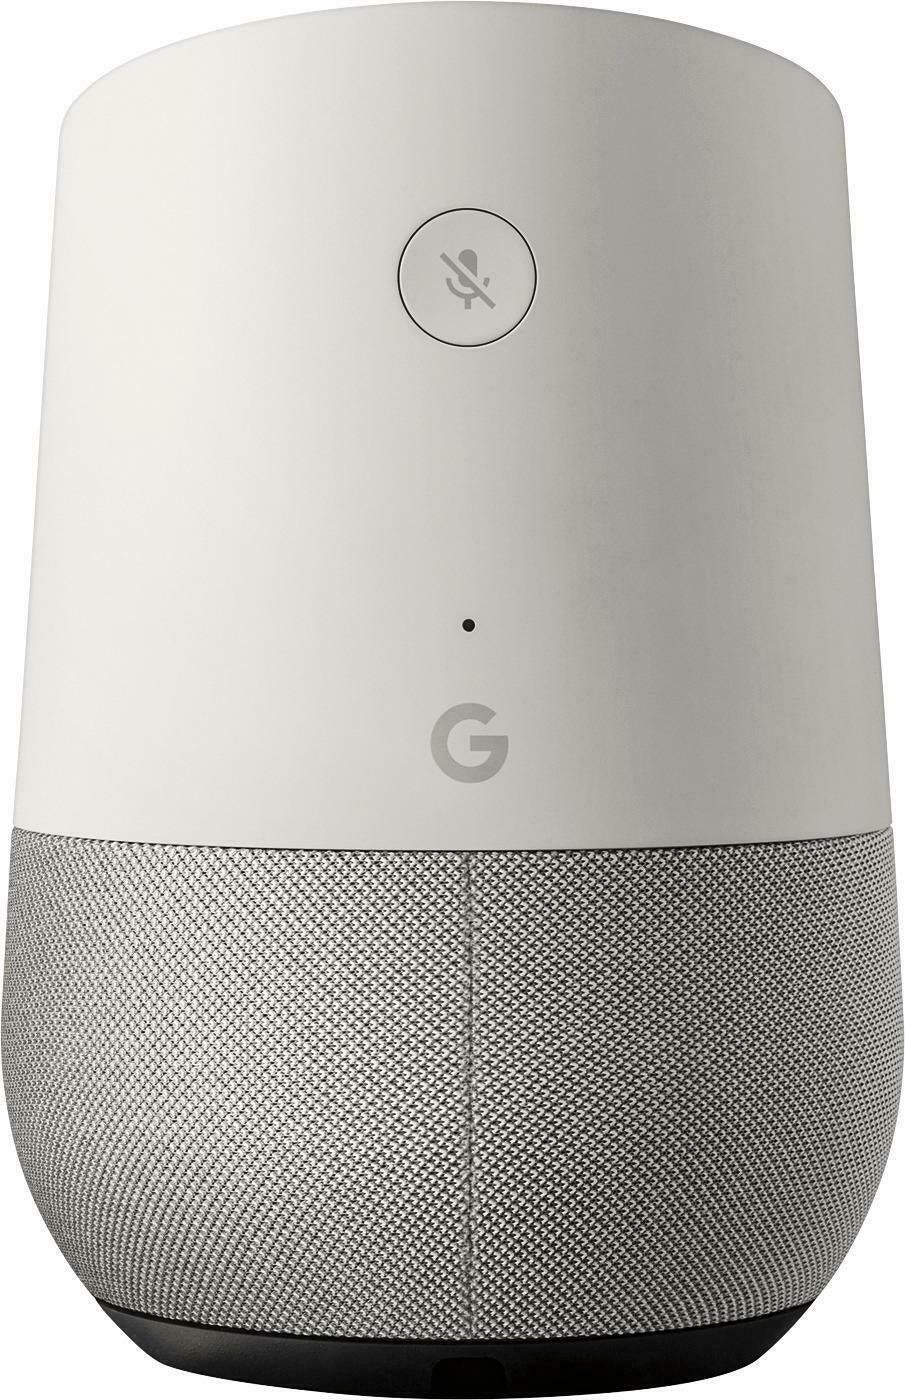 Google Home - Smart Speaker with Google Assistant - White Slate - Etyn Online {{ product_tag }}